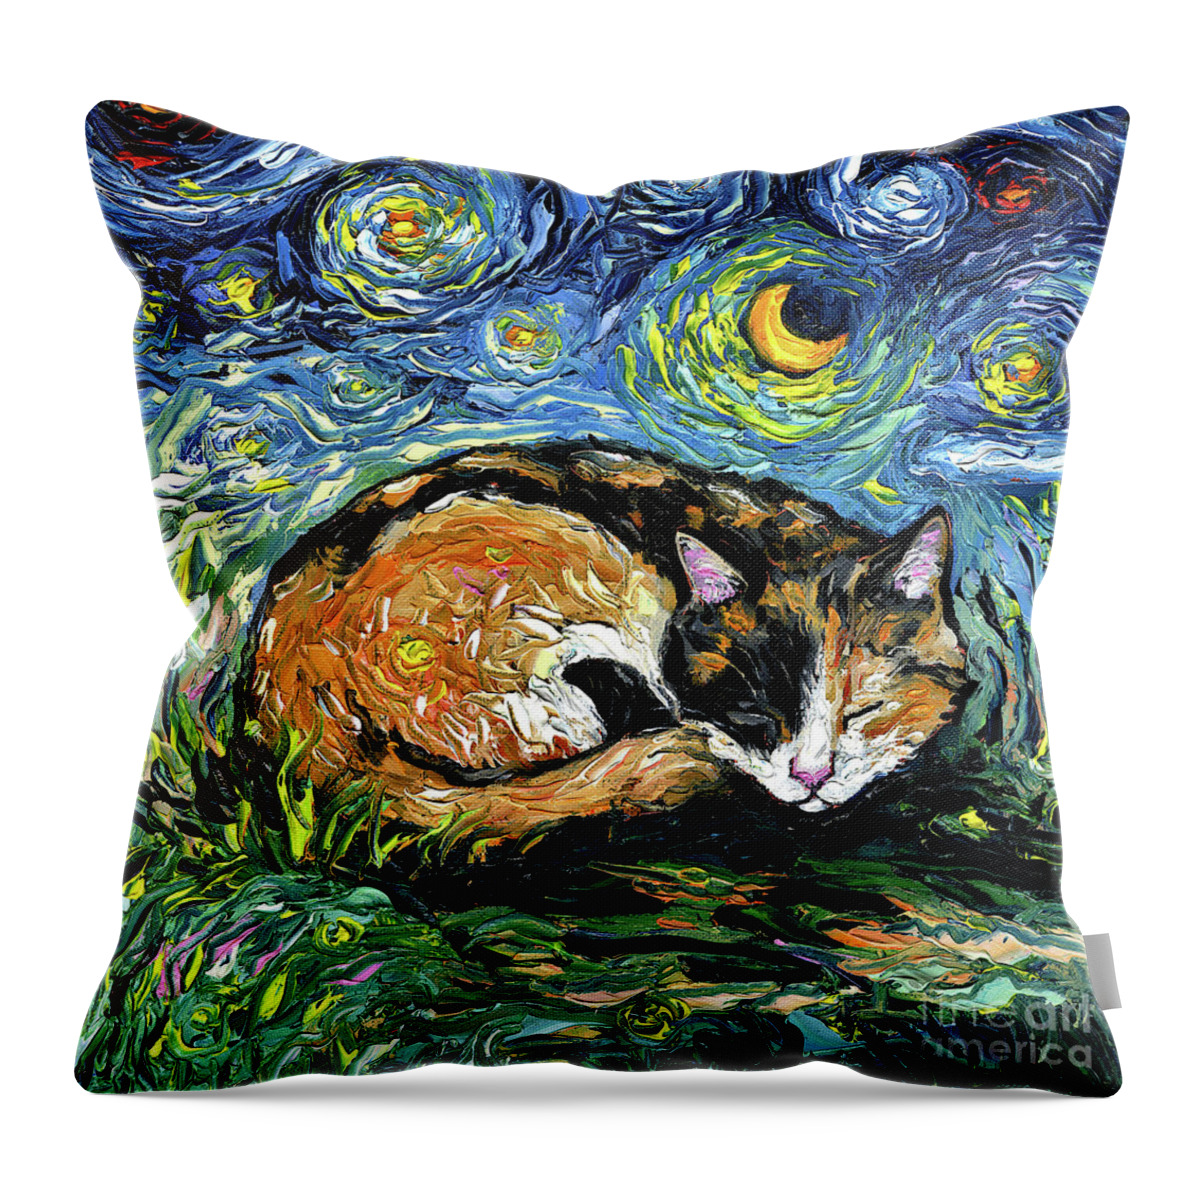 Calico Throw Pillow featuring the painting Sleepy Calico Night by Aja Trier